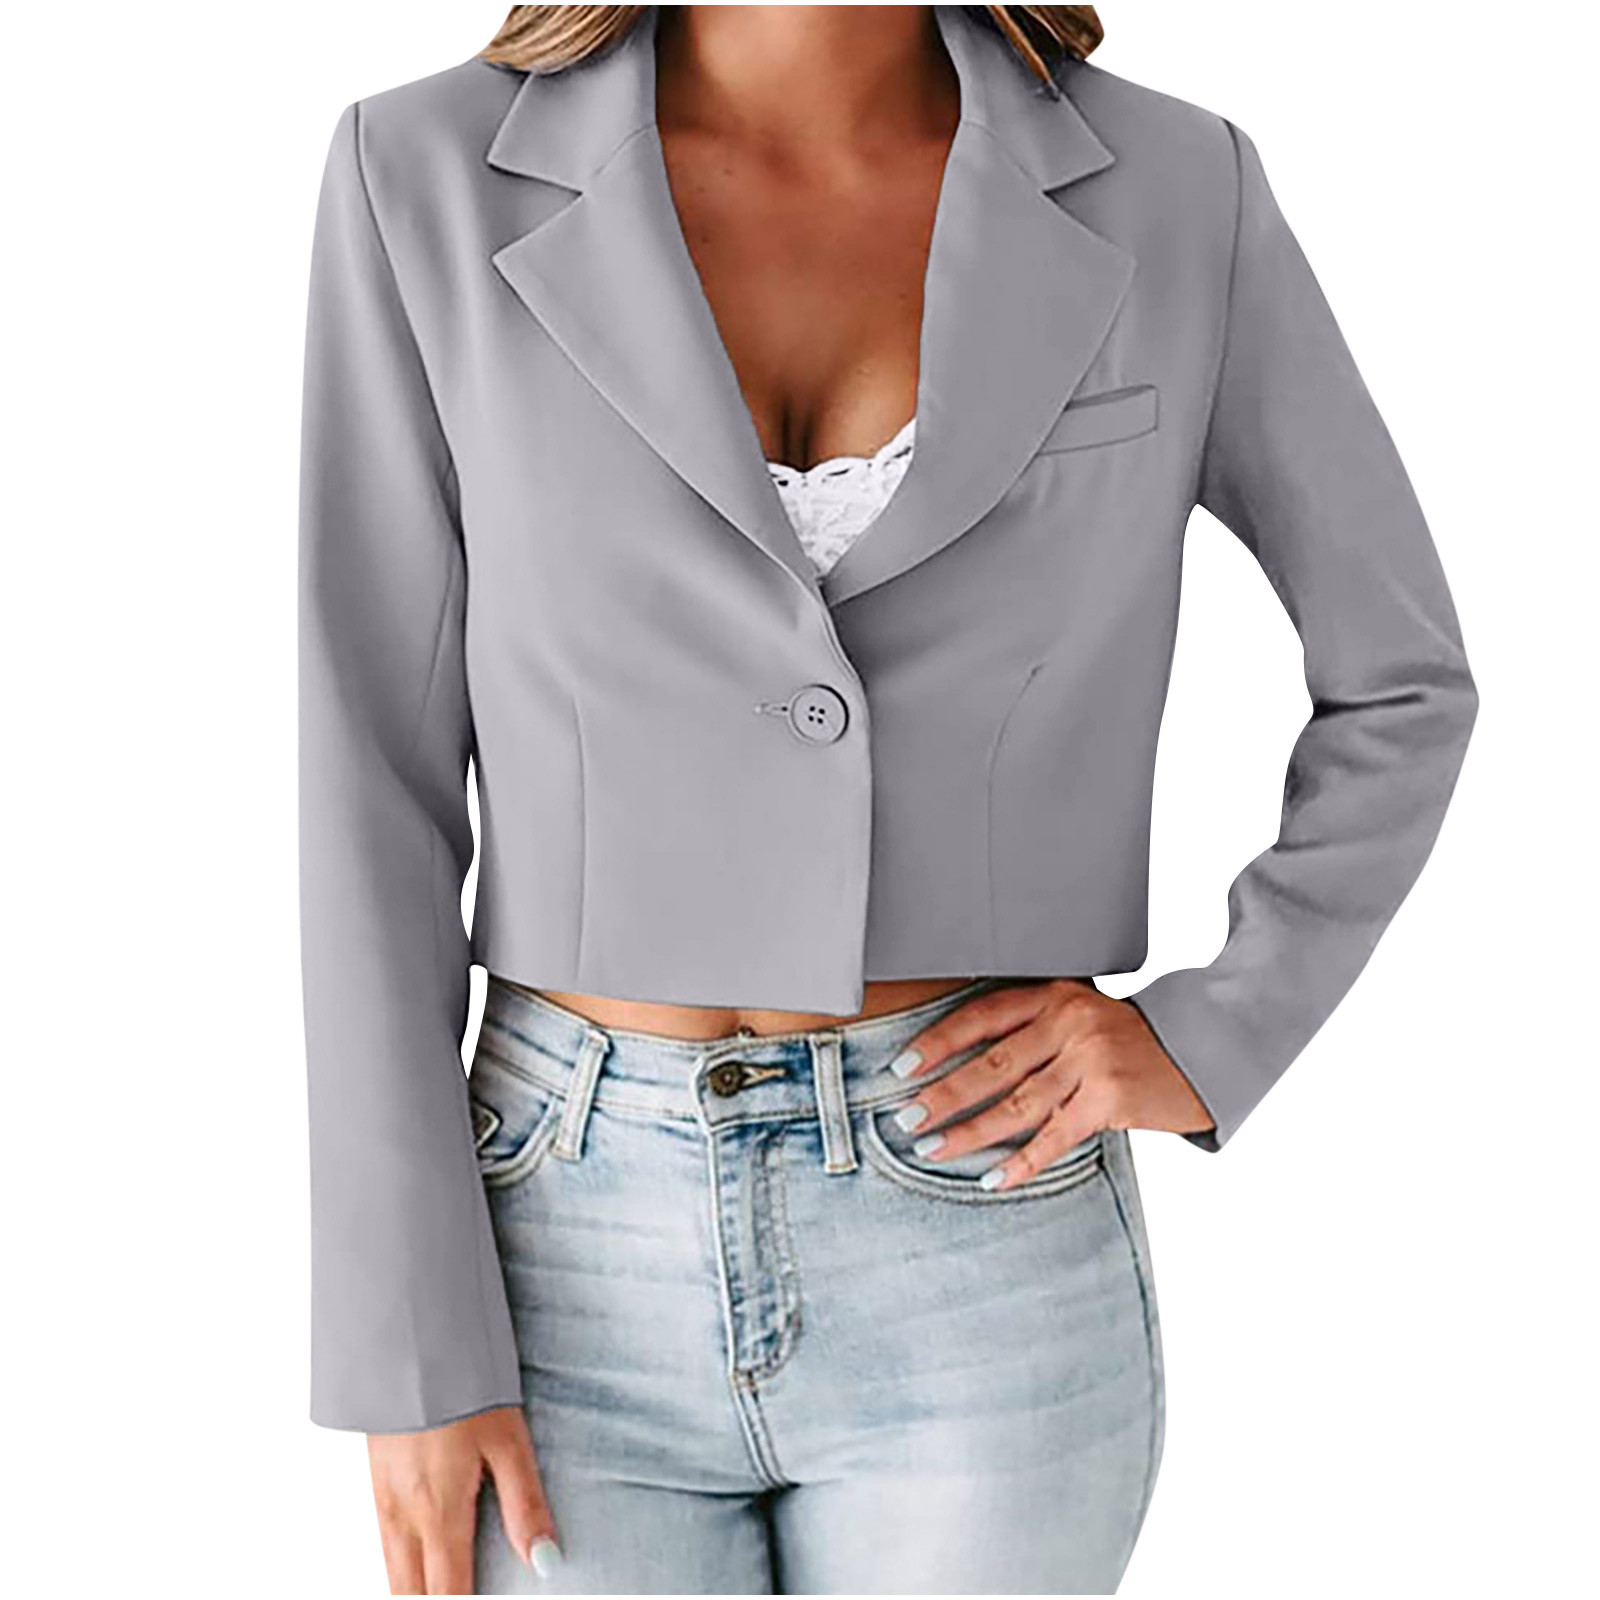 Fall Savings Clearance Deals ! BVnarty Women's Top Business Attire Cardigan  Coat Plus Size Solid Color Lapel Long Cuff Sleeve Lightweight Shacket